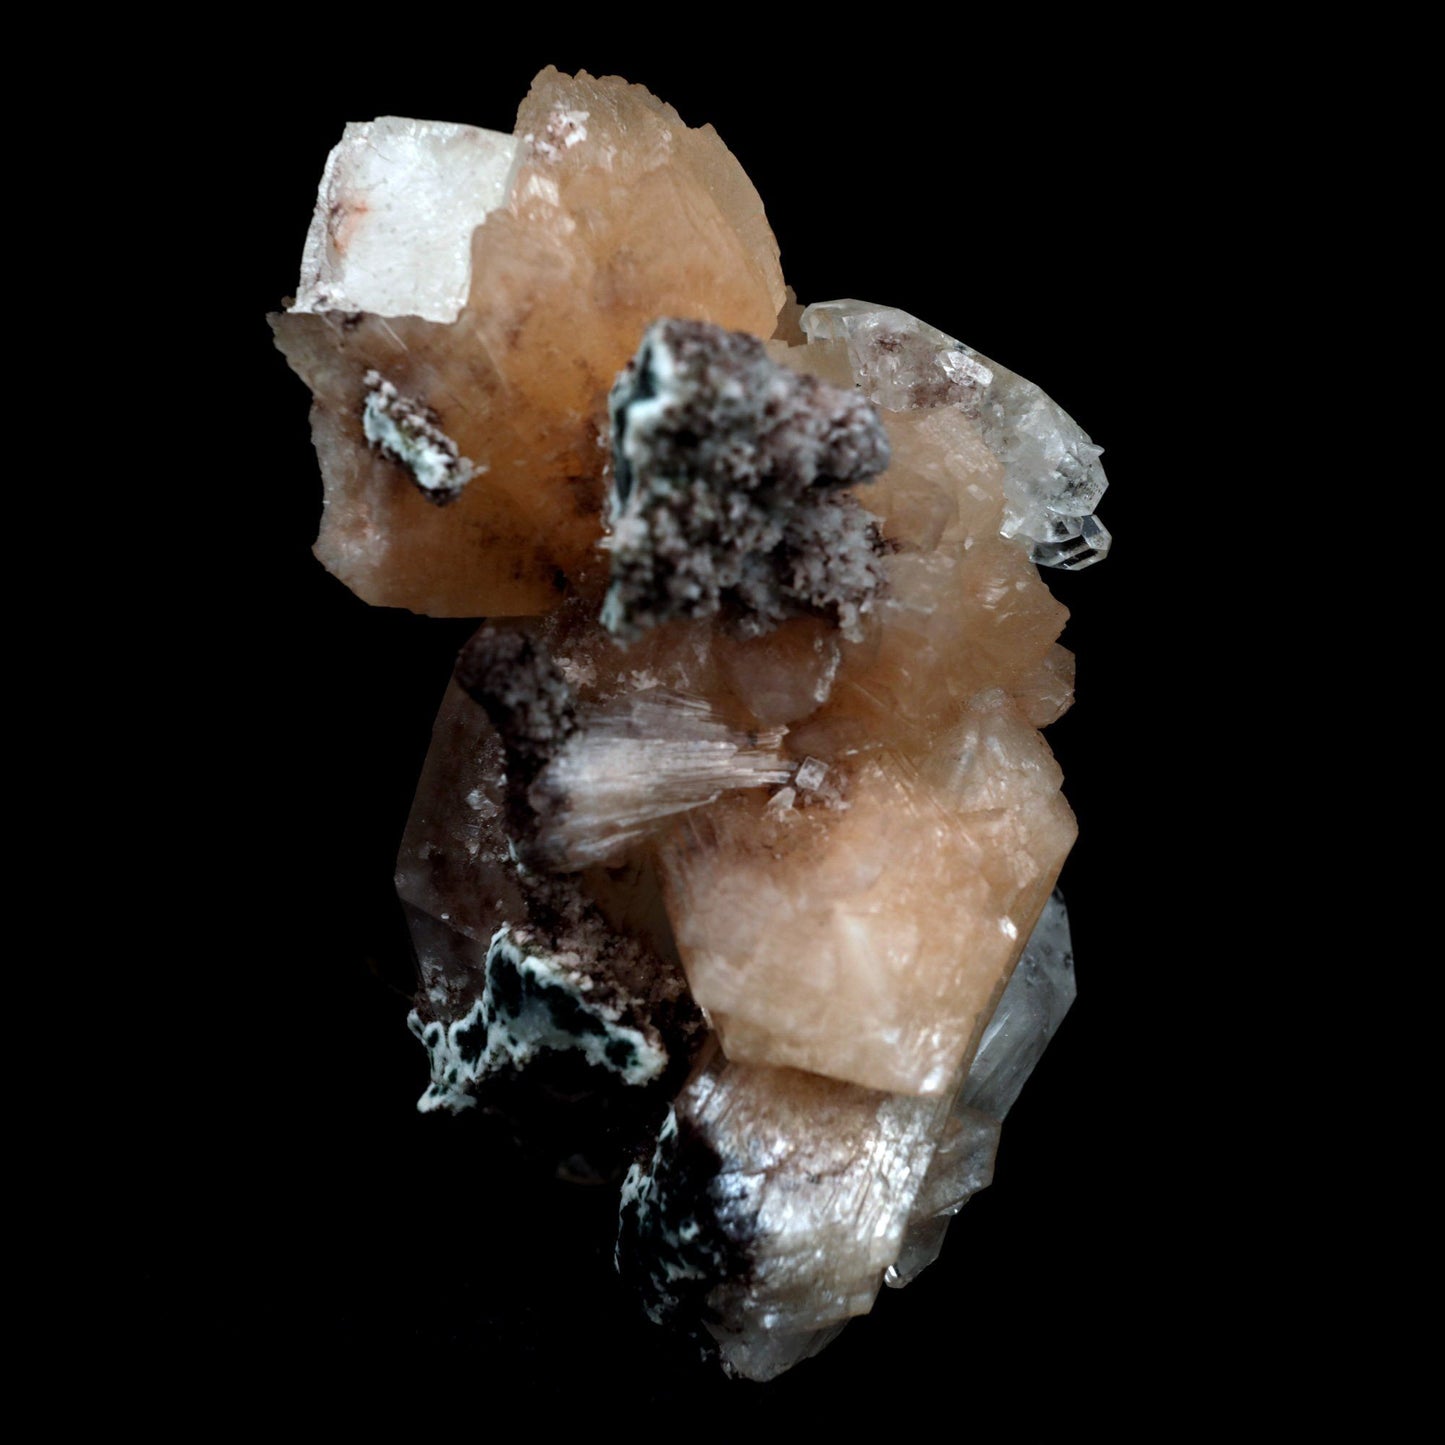 Stilbite with Apophyllite on Chalcedony Natural Mineral Specimen # B …  https://www.superbminerals.us/products/stilbite-with-apophyllite-natural-mineral-specimen-b-4799  Features: An impressive doubly terminated, lustrous salmon-pink bladed stilbite bowtie, nicely accented with side car crystals, is dramatically set on the thin basalt crust on this beautifully sculptural small cabinet from recent finds in Jalgaon. The secondary doubly terminated stilbite. Small stilbite and smaller